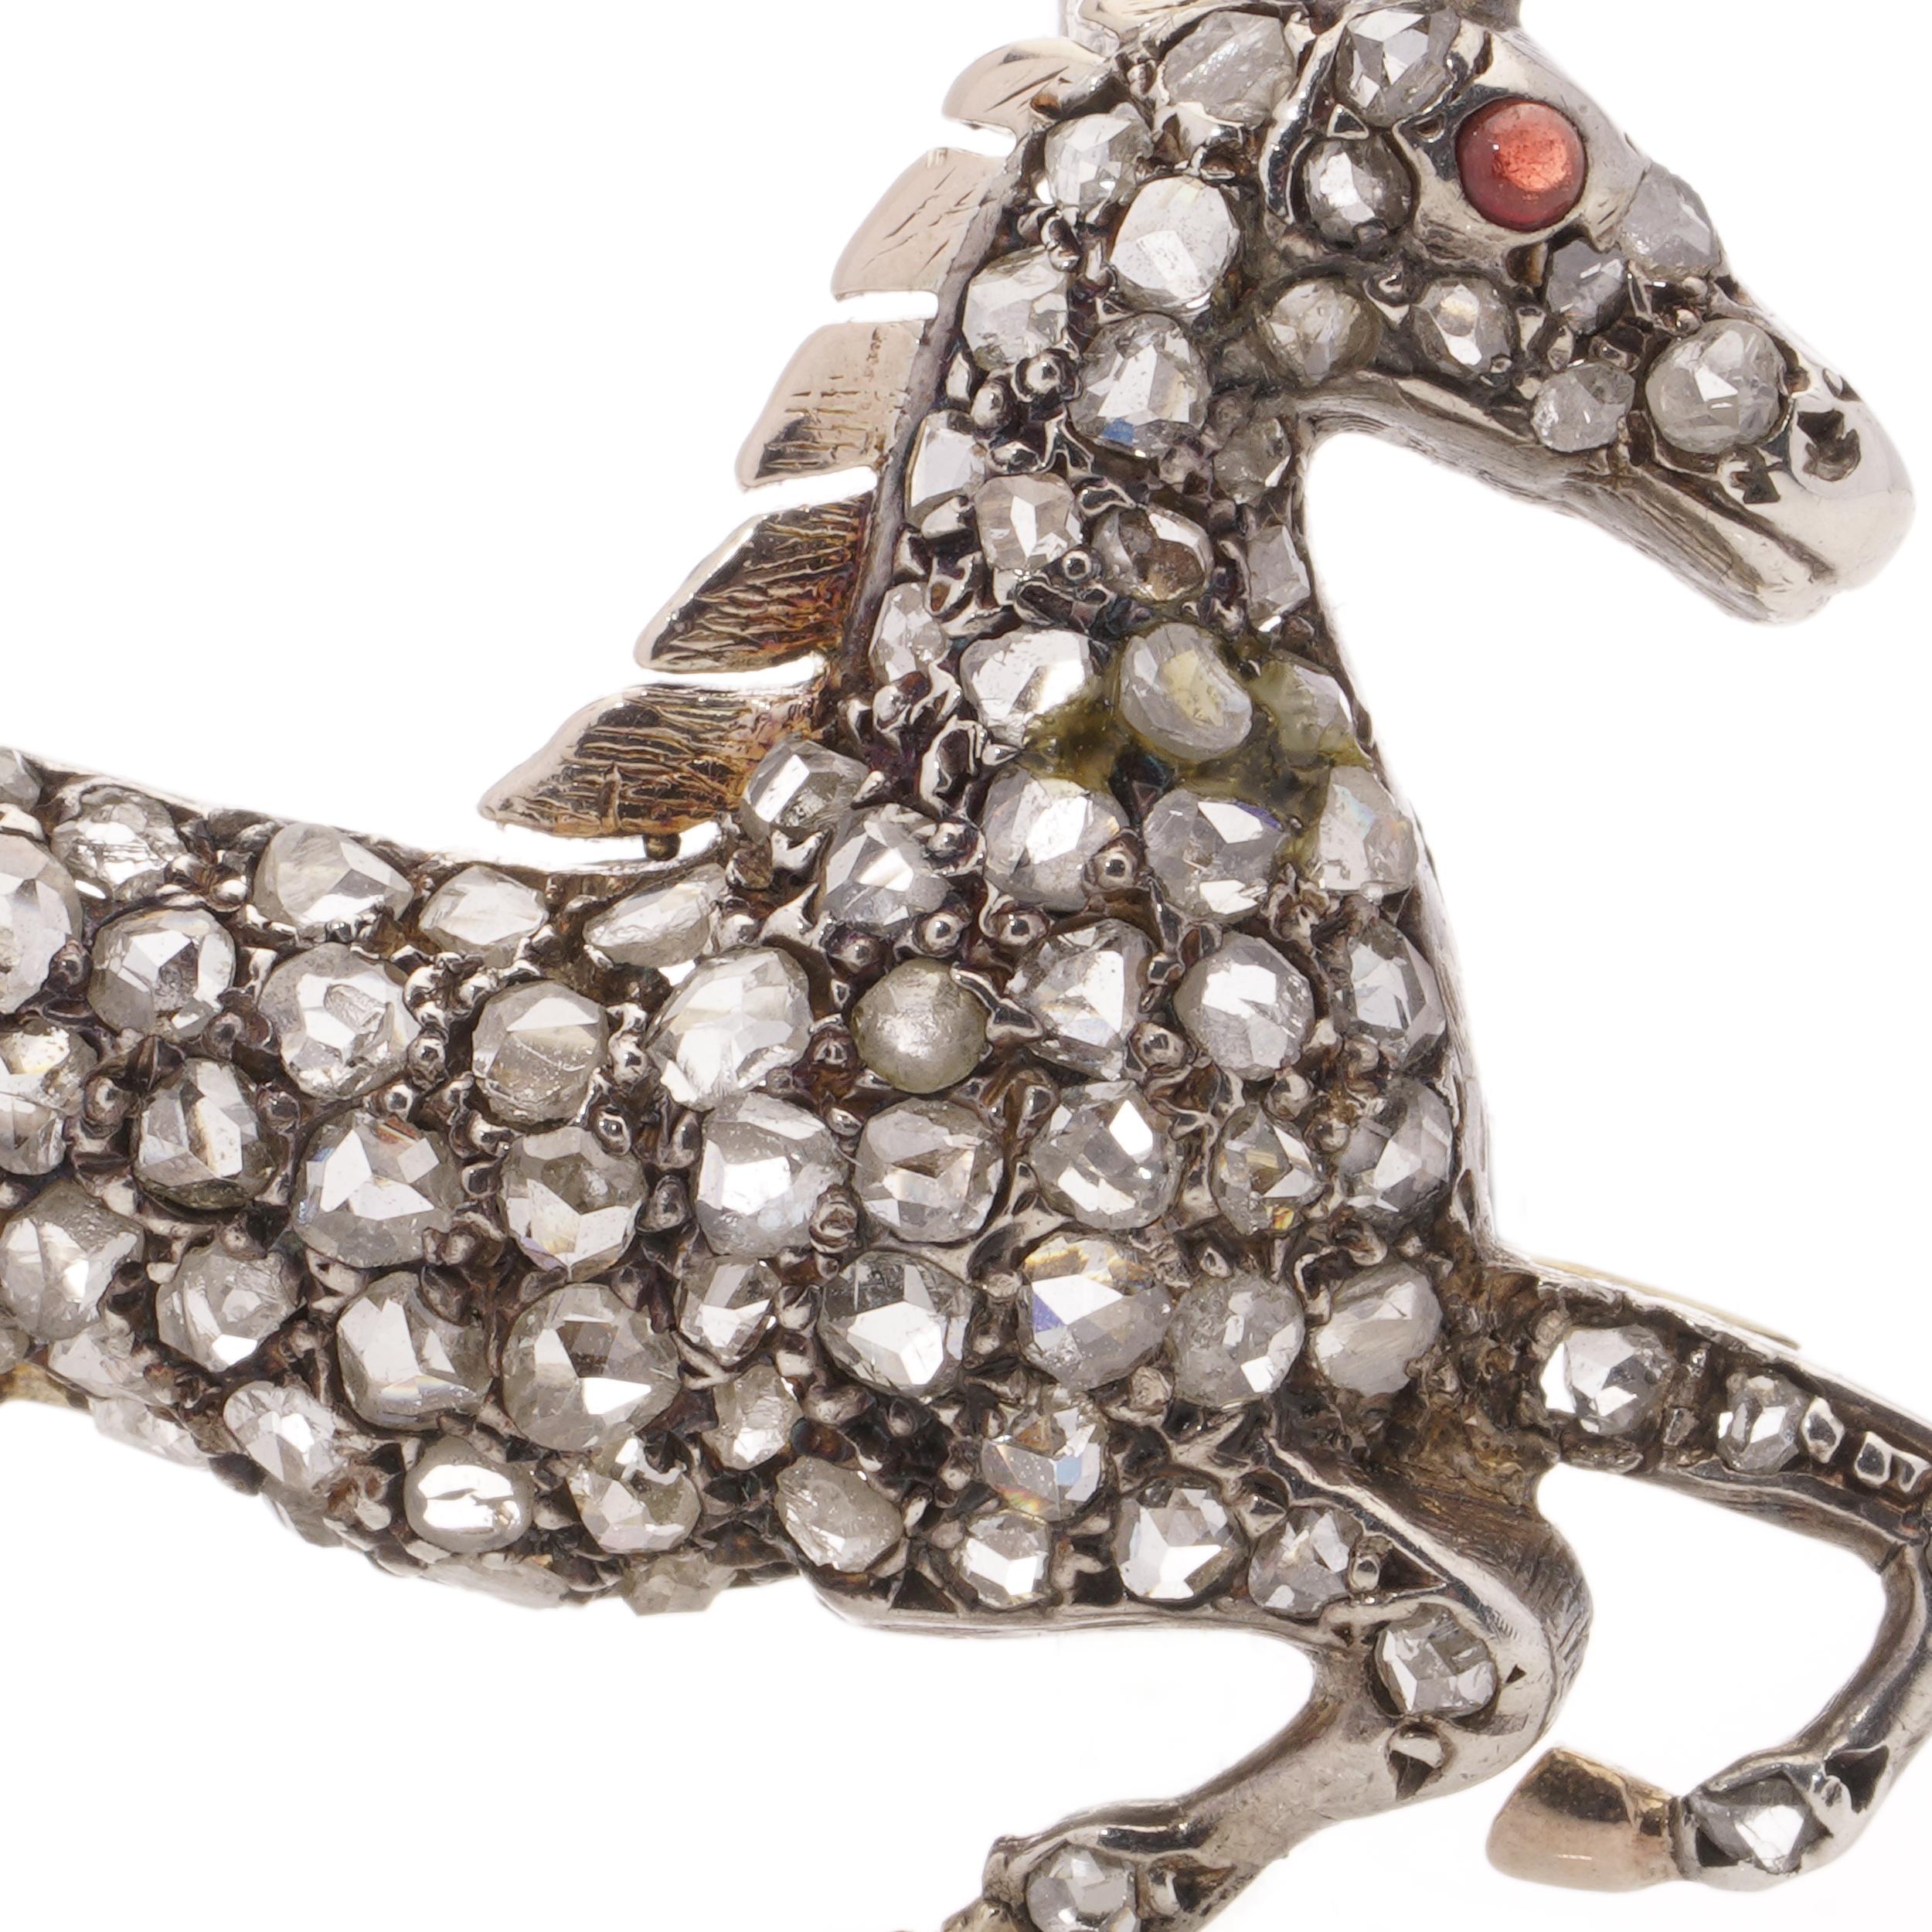 Victorian silver and 9kt gold plated back, horse brooch with rose cut diamonds In Good Condition For Sale In Braintree, GB